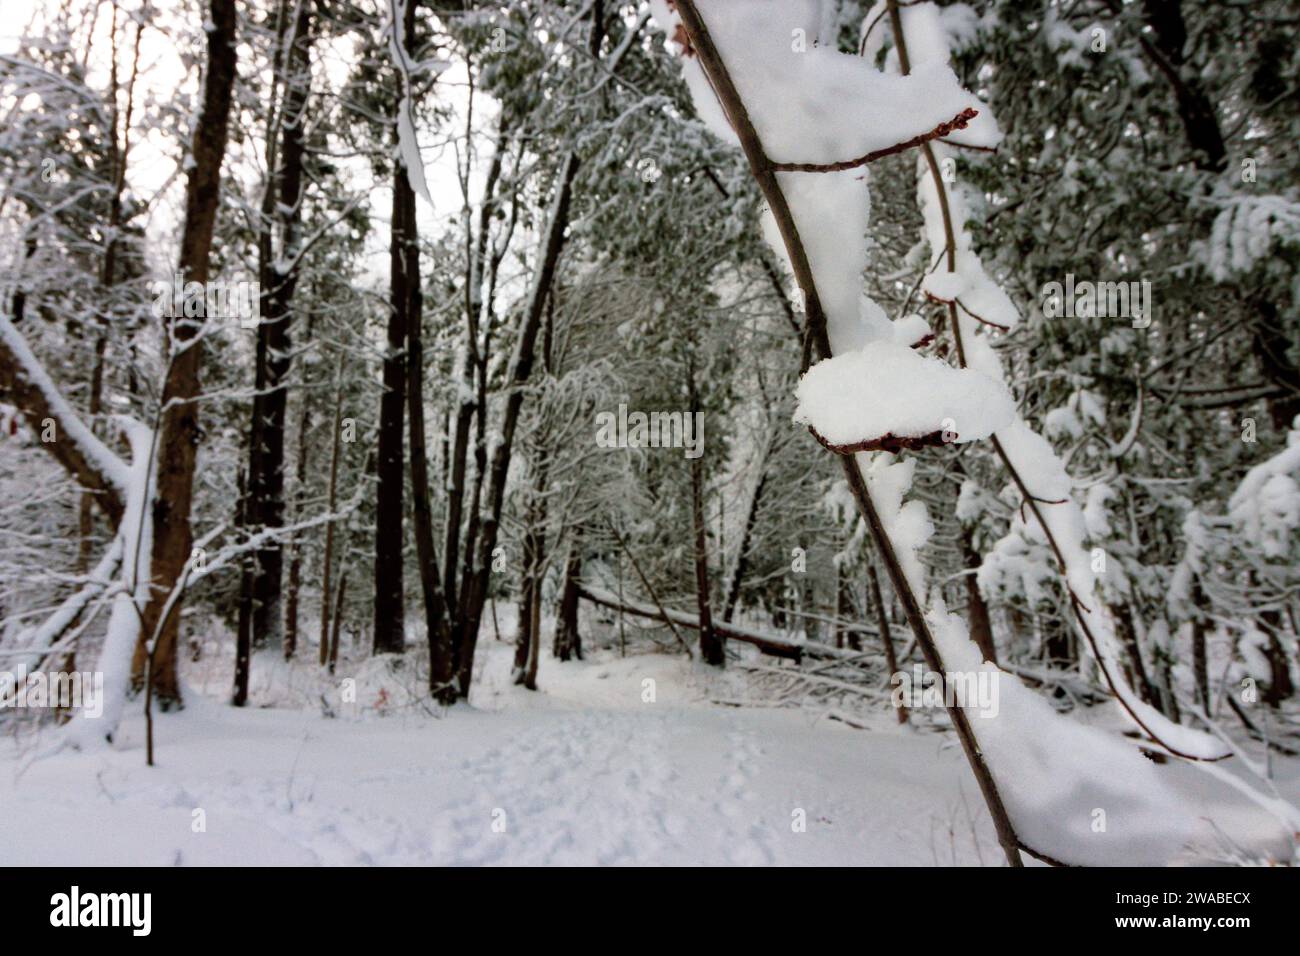 A snow-laden branch dangles in a snowy forest Stock Photo